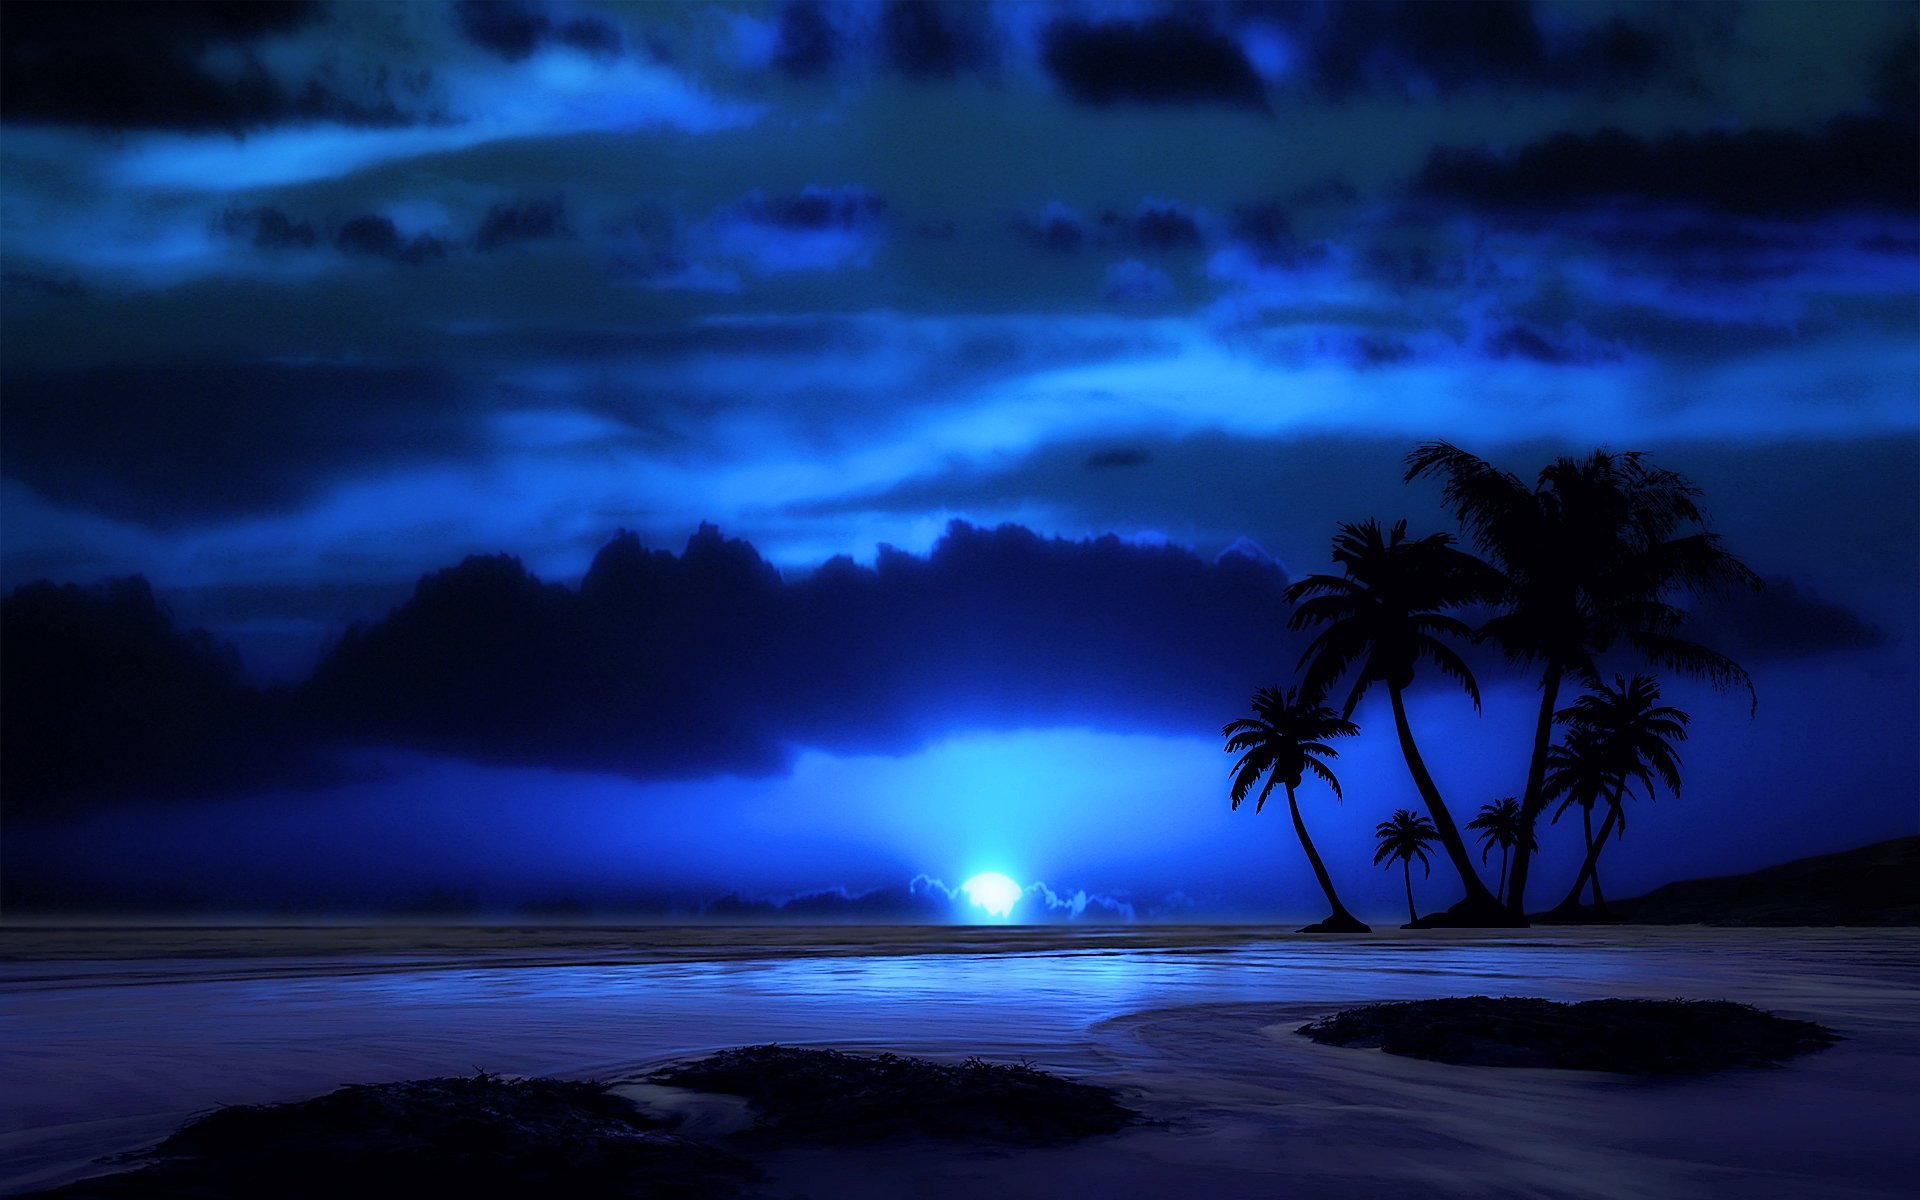 1080p Images Hd Wallpapers Of Beach At Night